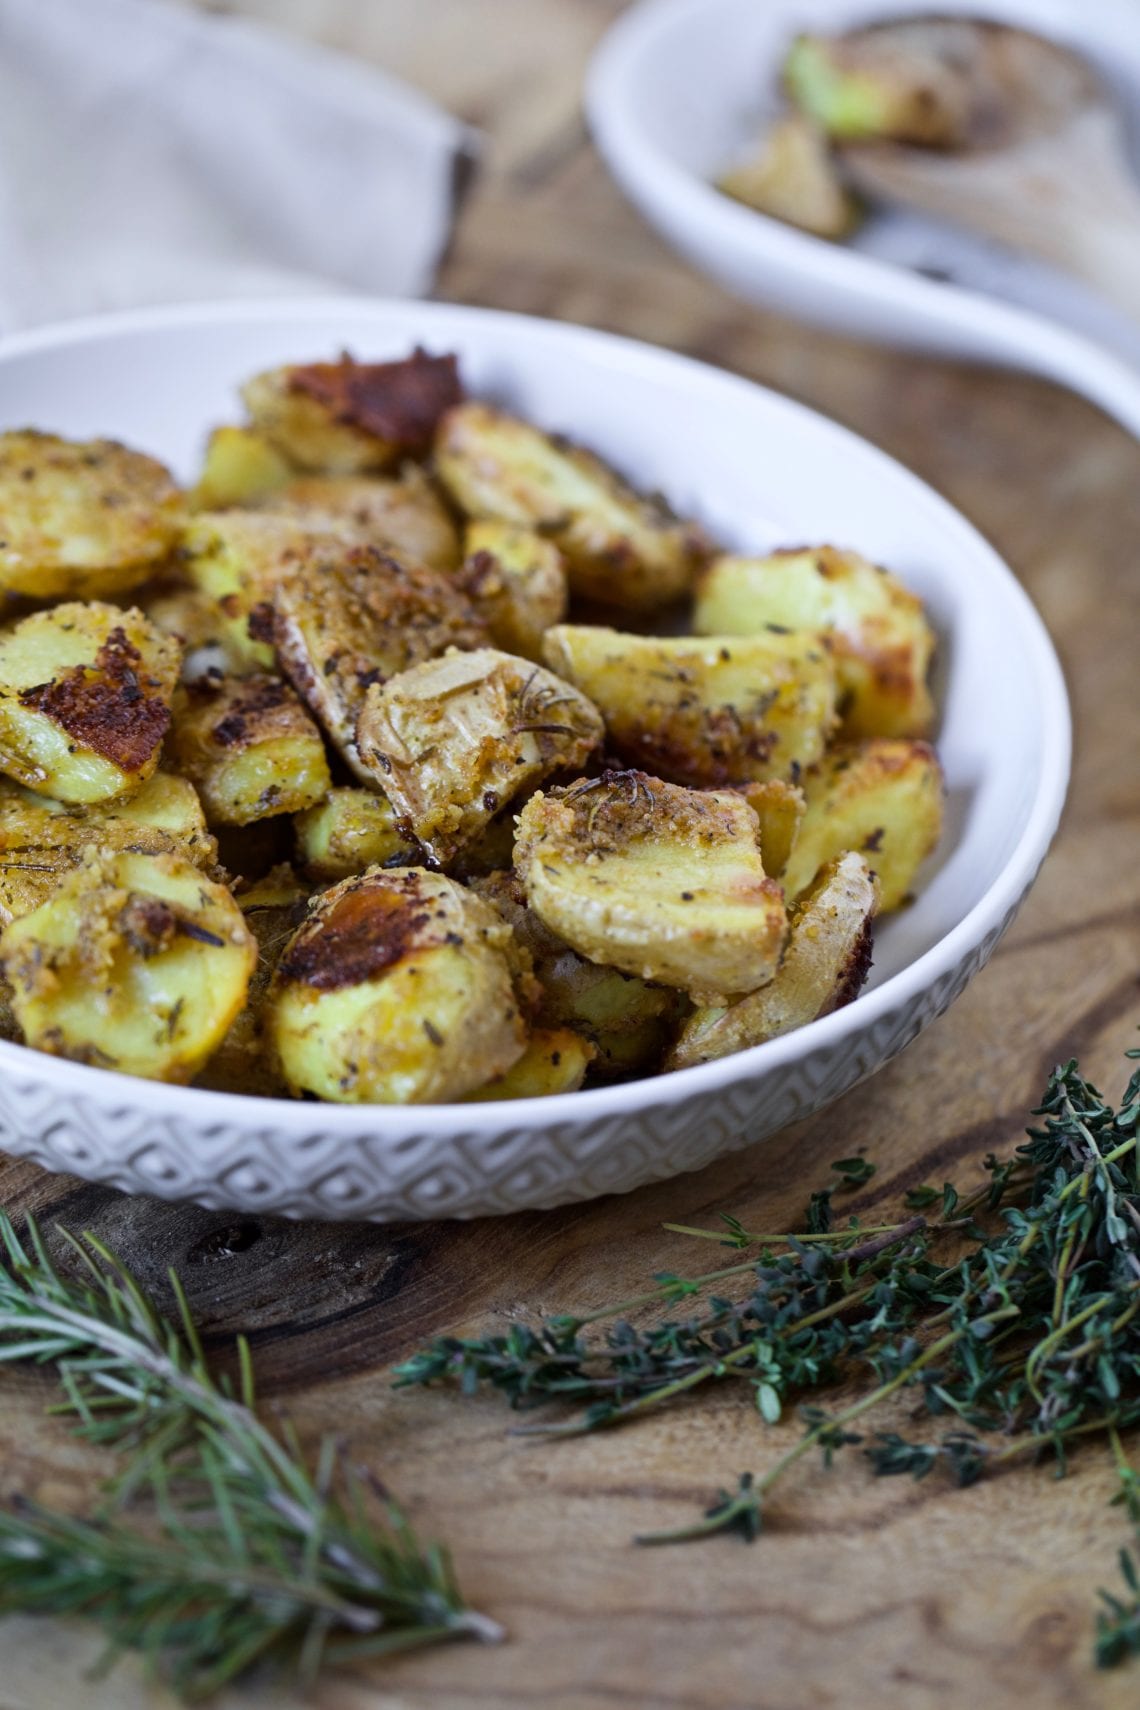 oven roasted potatoes with a crispy exterior and herbs placed in a white bowl on a wooden board